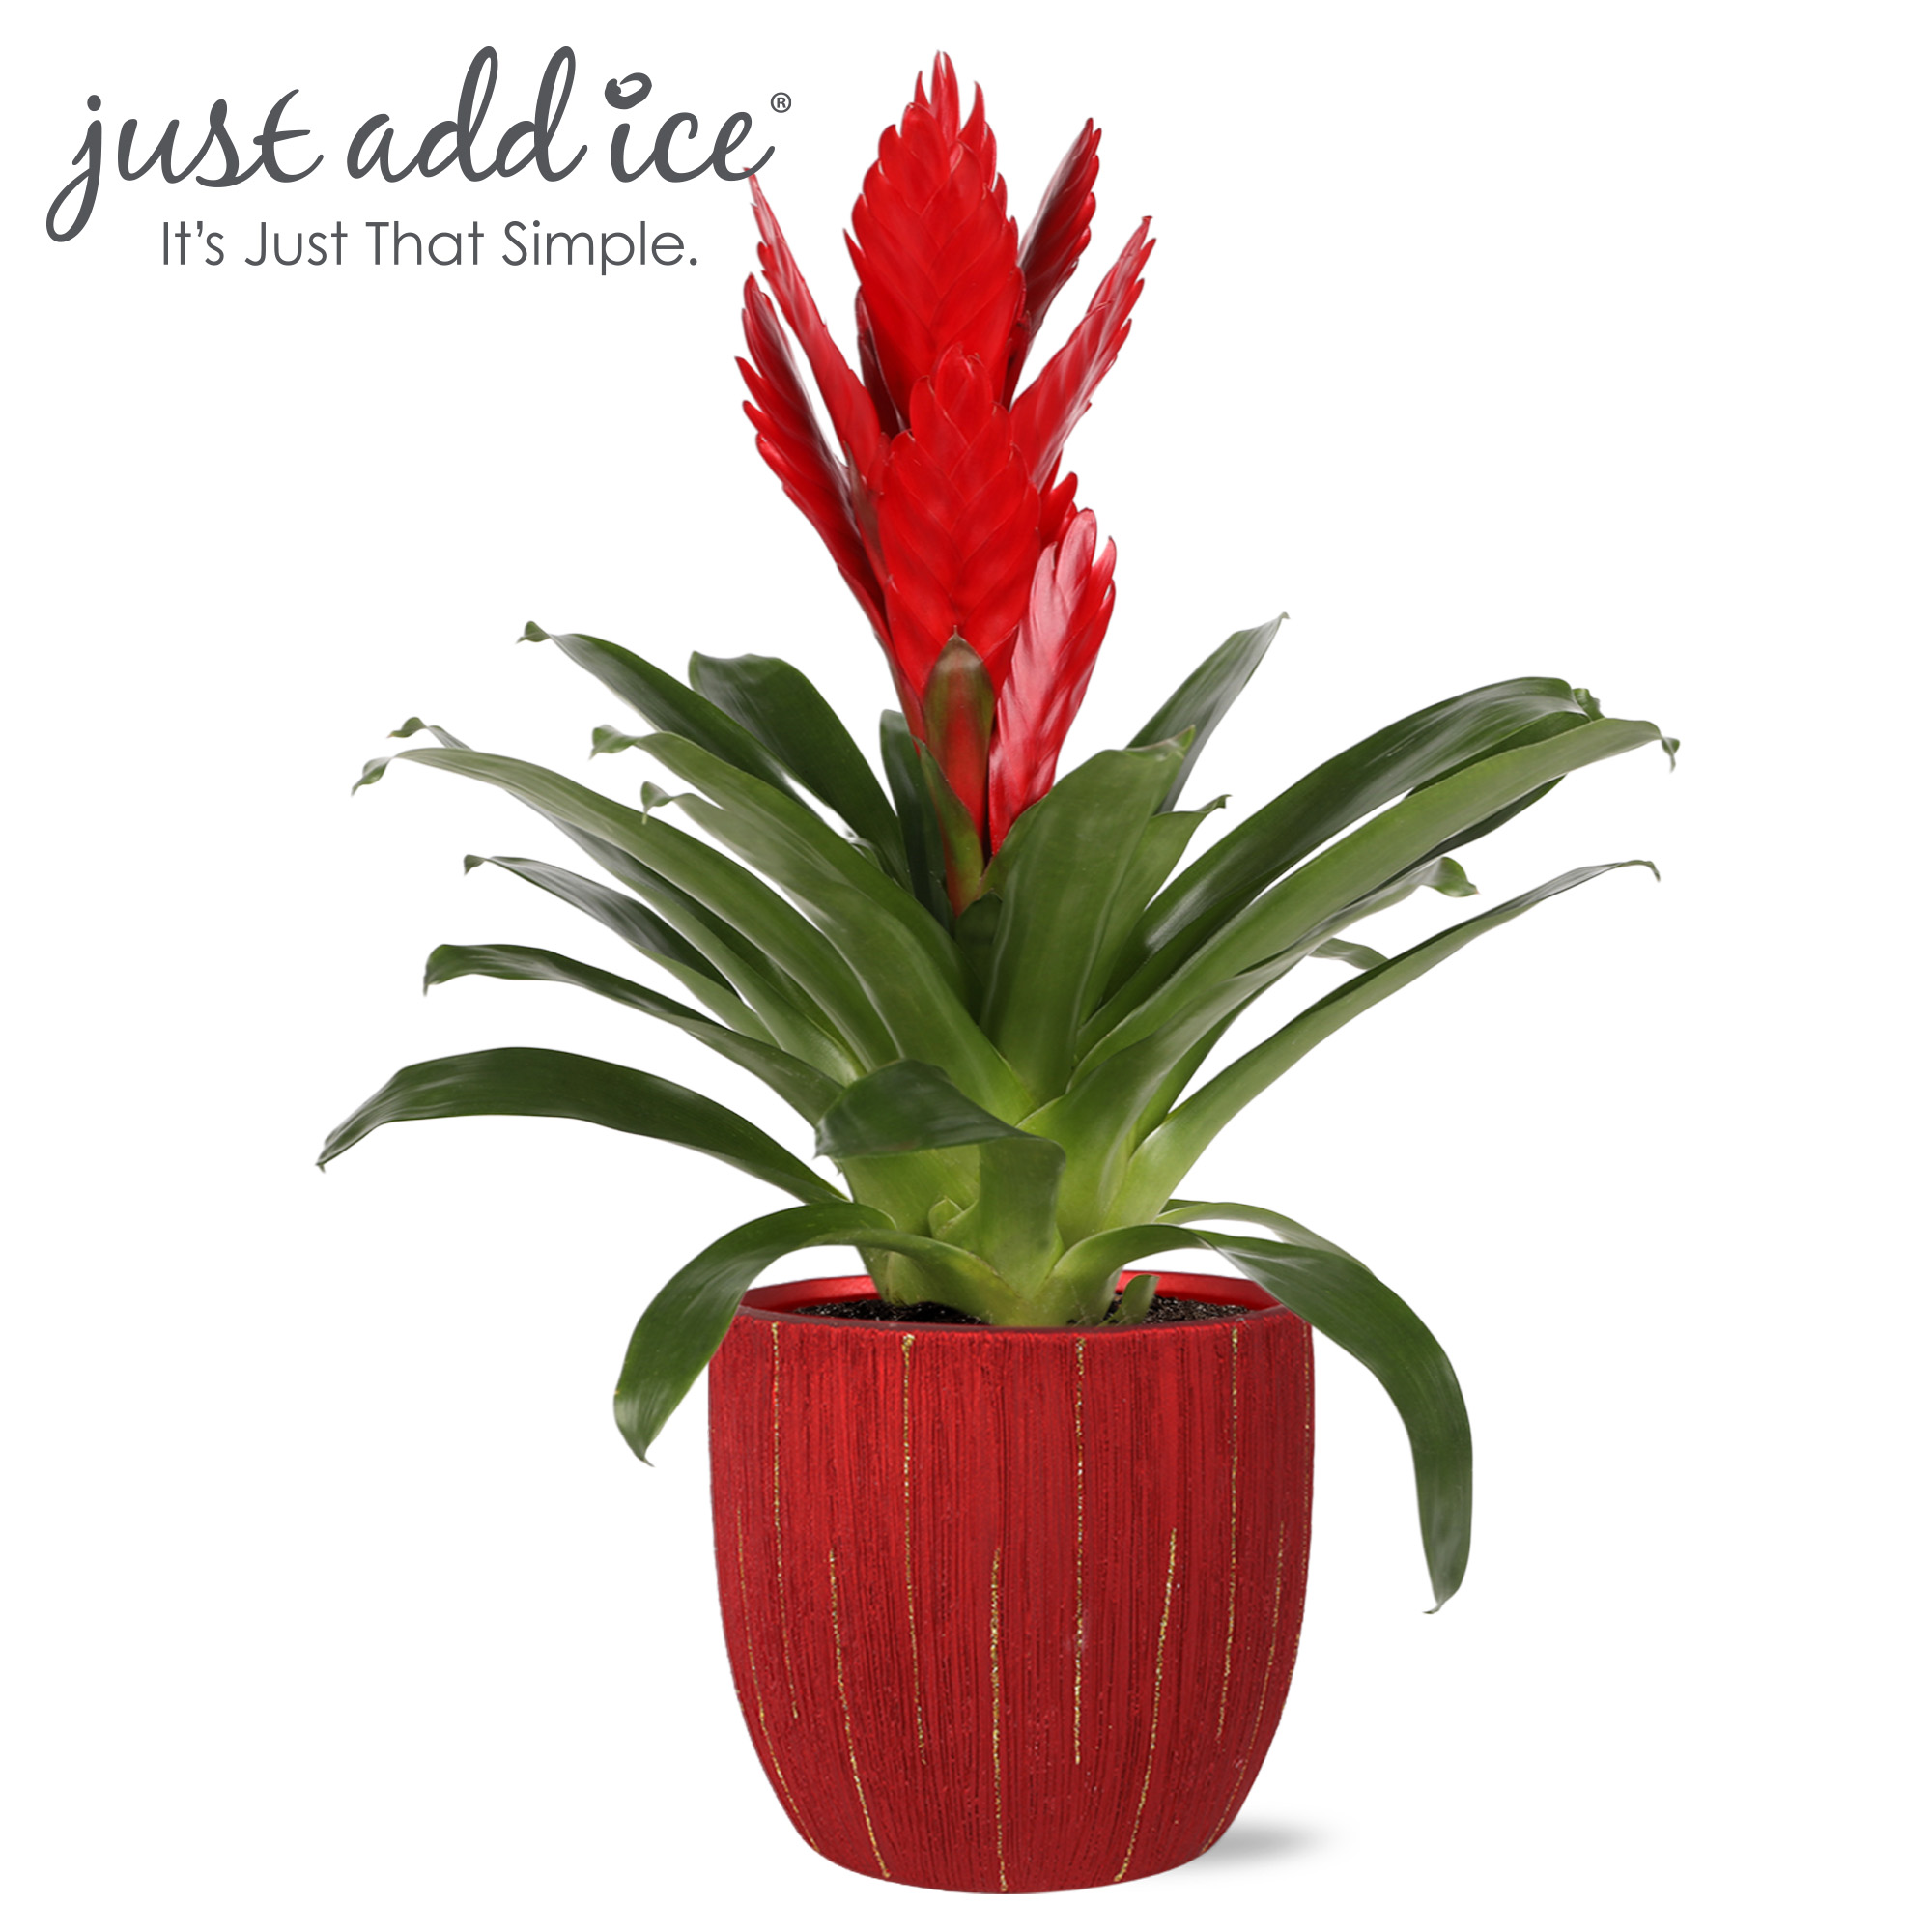 Just Add Ice 15" Tall Red Vriesea Bromeliad in 5" Red Ceramic Pot, Live Plant, Indirect Light, Indoor House Plant - image 1 of 5